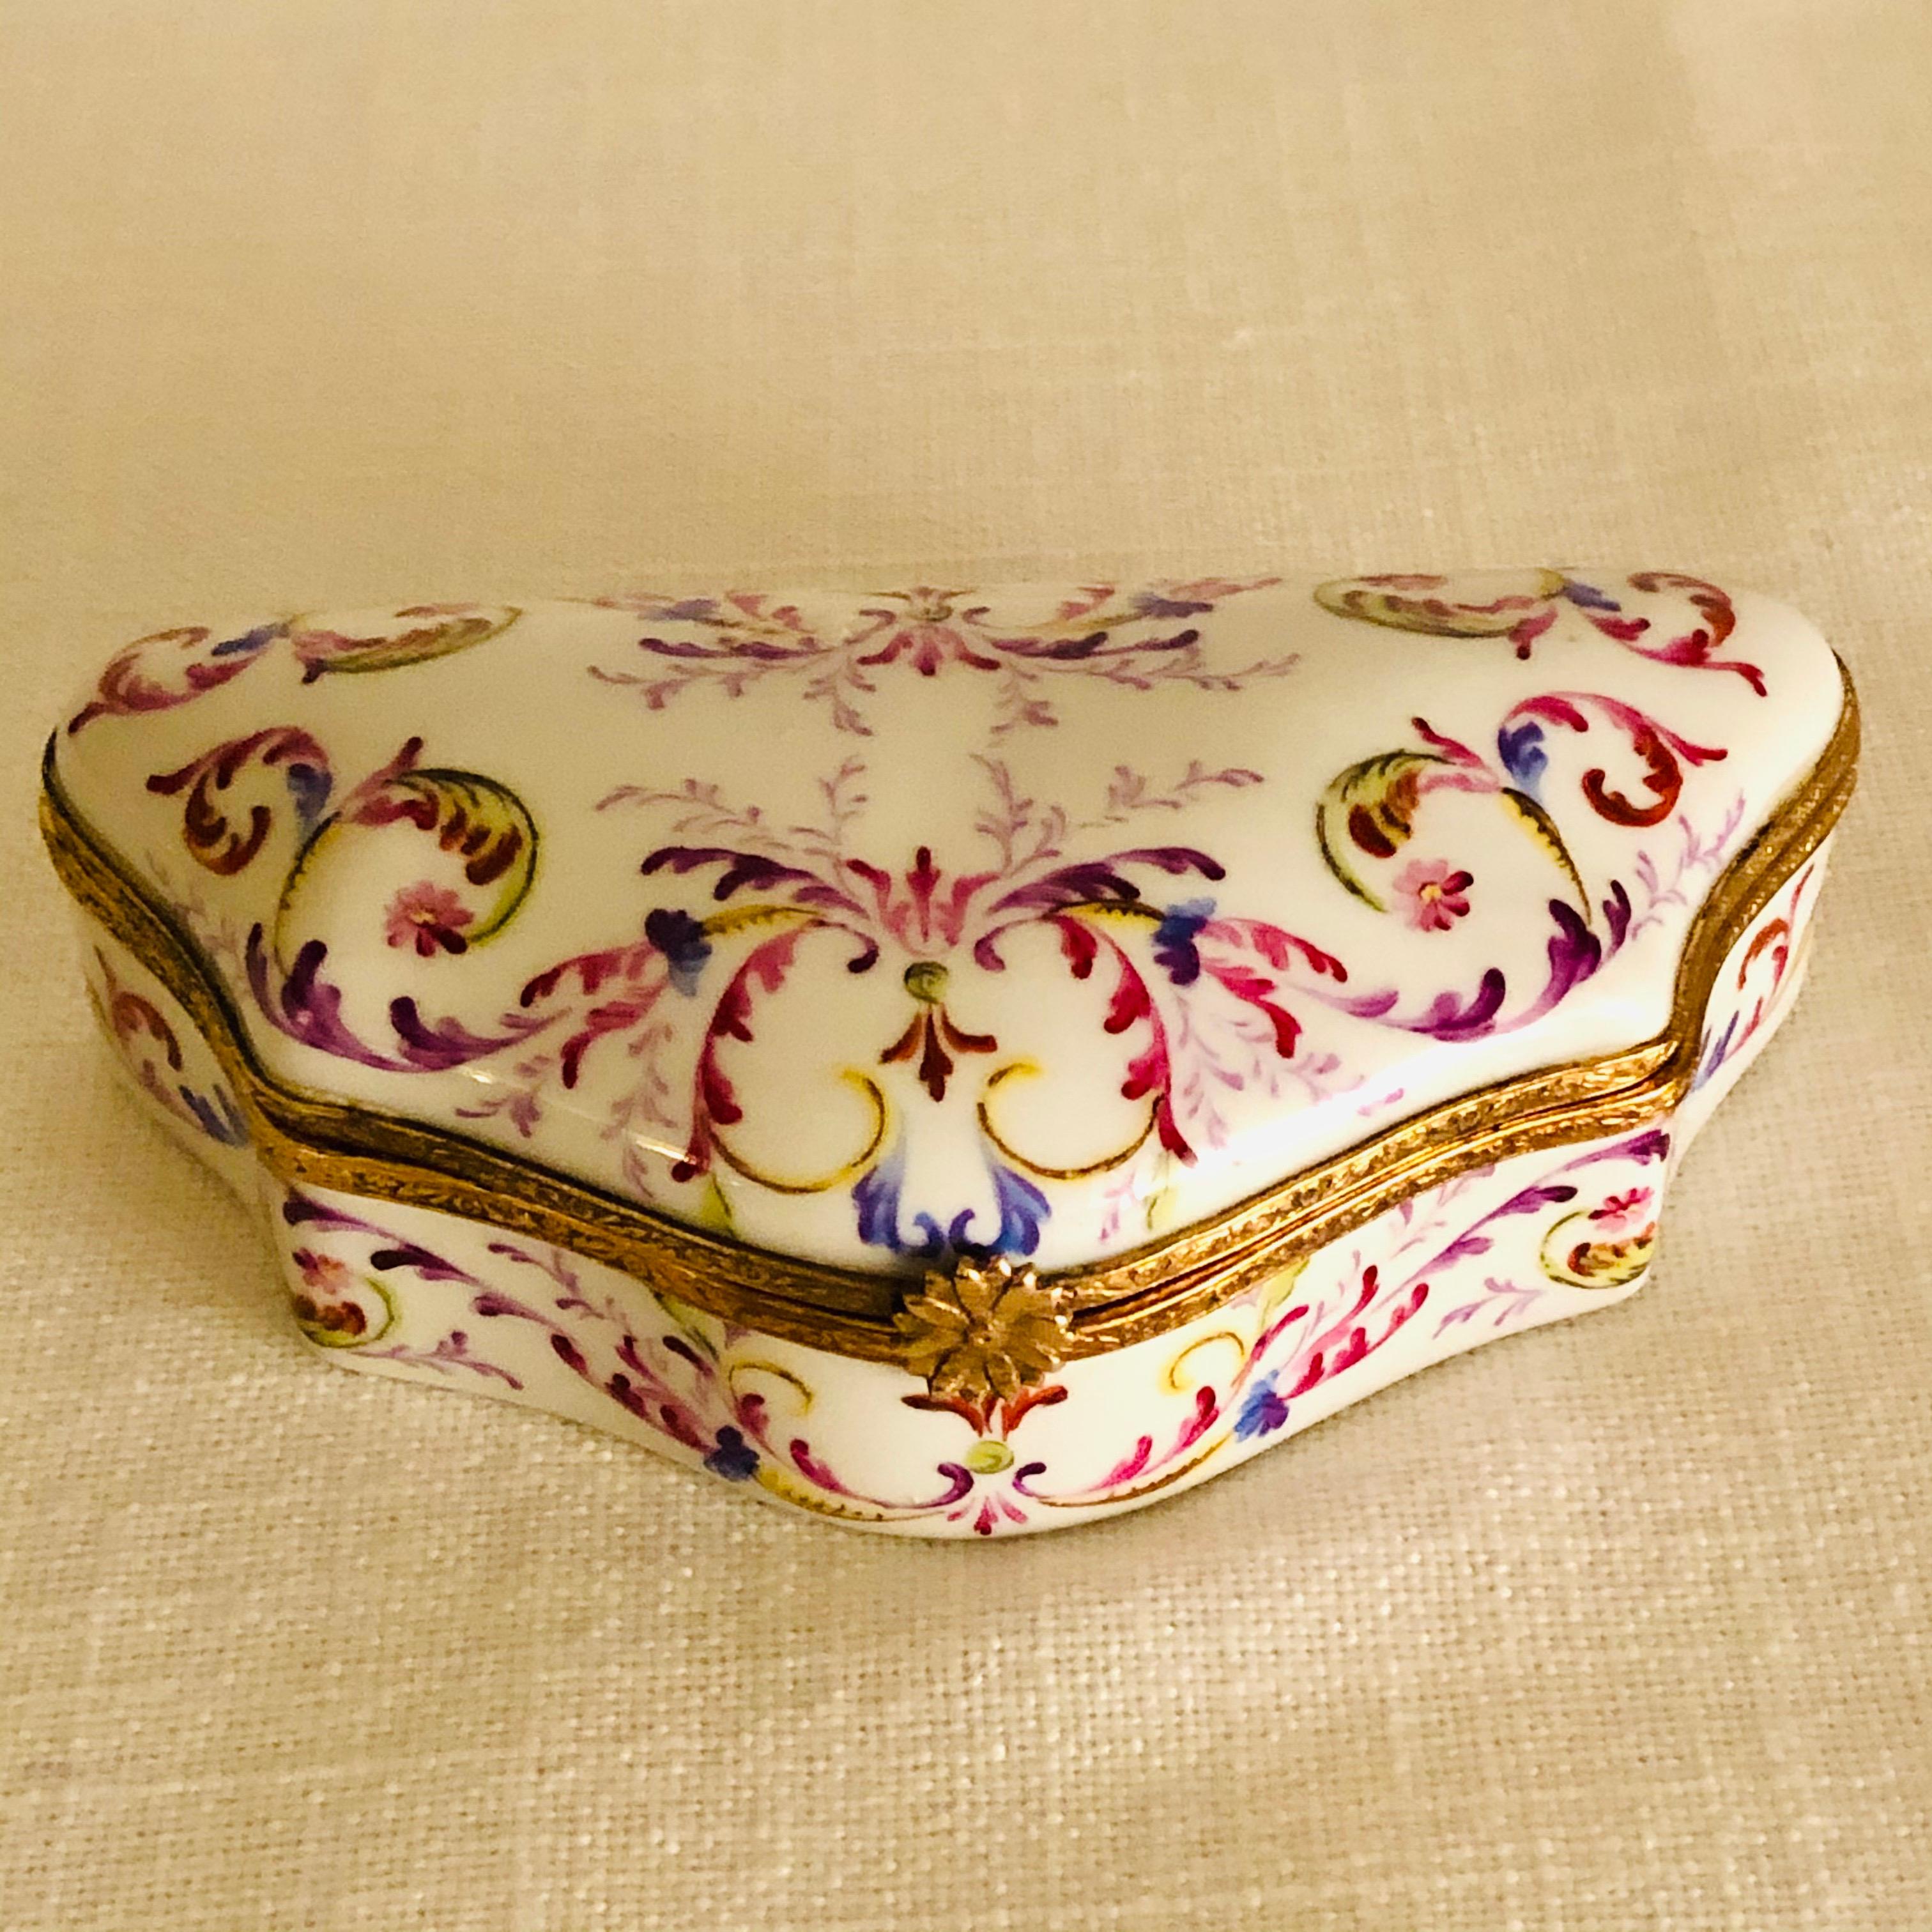 This is a stunning Le Tallec porcelain box. It was designed at the studio of Le Tallec in Paris, which was at a later date incorporated into Tiffany and Company. It is decorated with an elaborate scrolling design of many colors and flowers. The eye